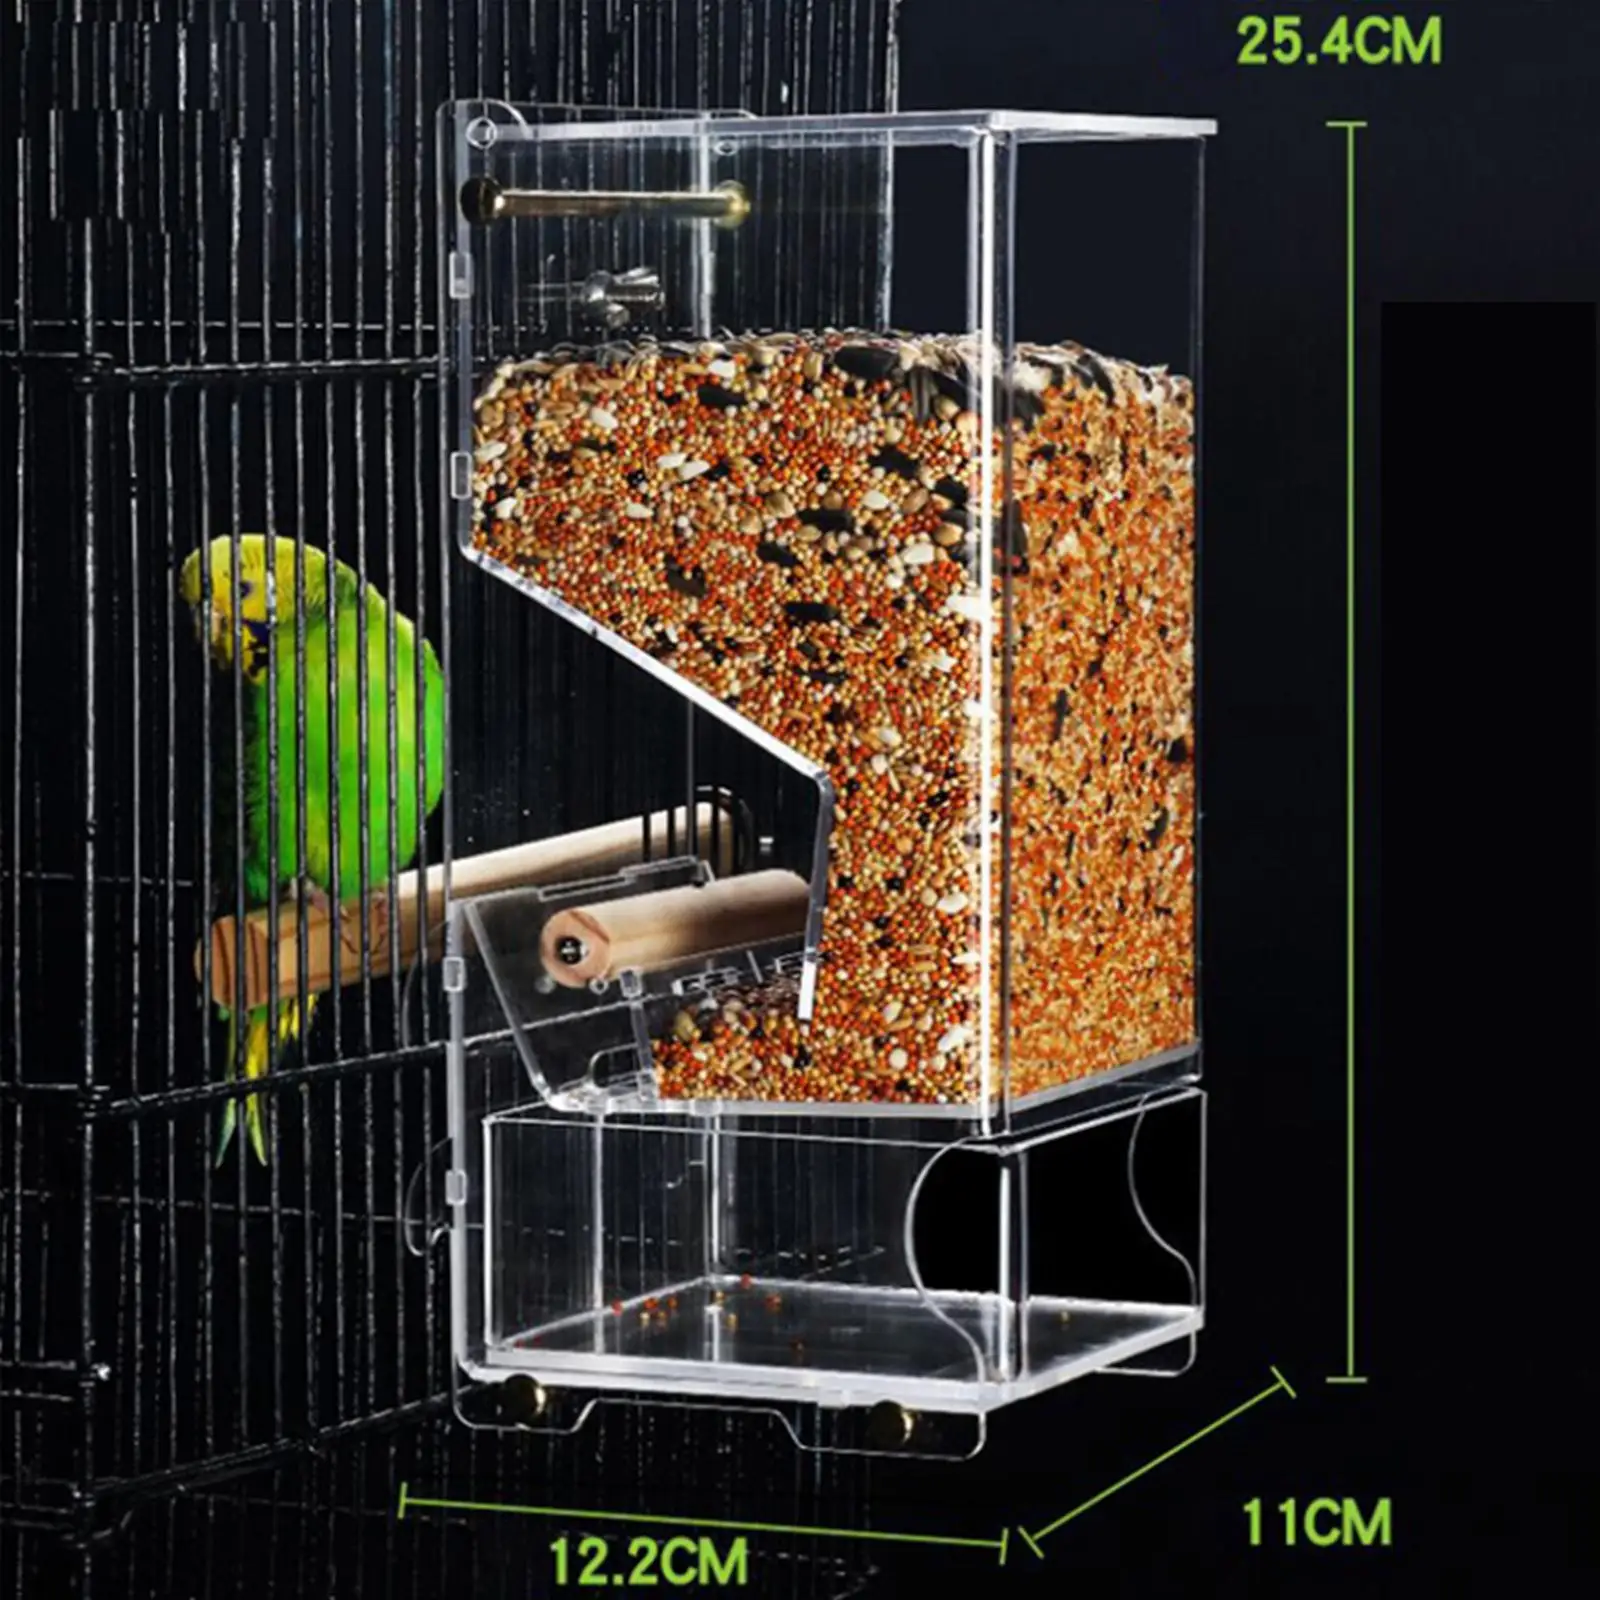 Acrylic Bird Cage Feeder Cage Accessories Parrot Feeder Transparent for Lovebirds Canary Small to Medium Birds Cockatiel Budgie